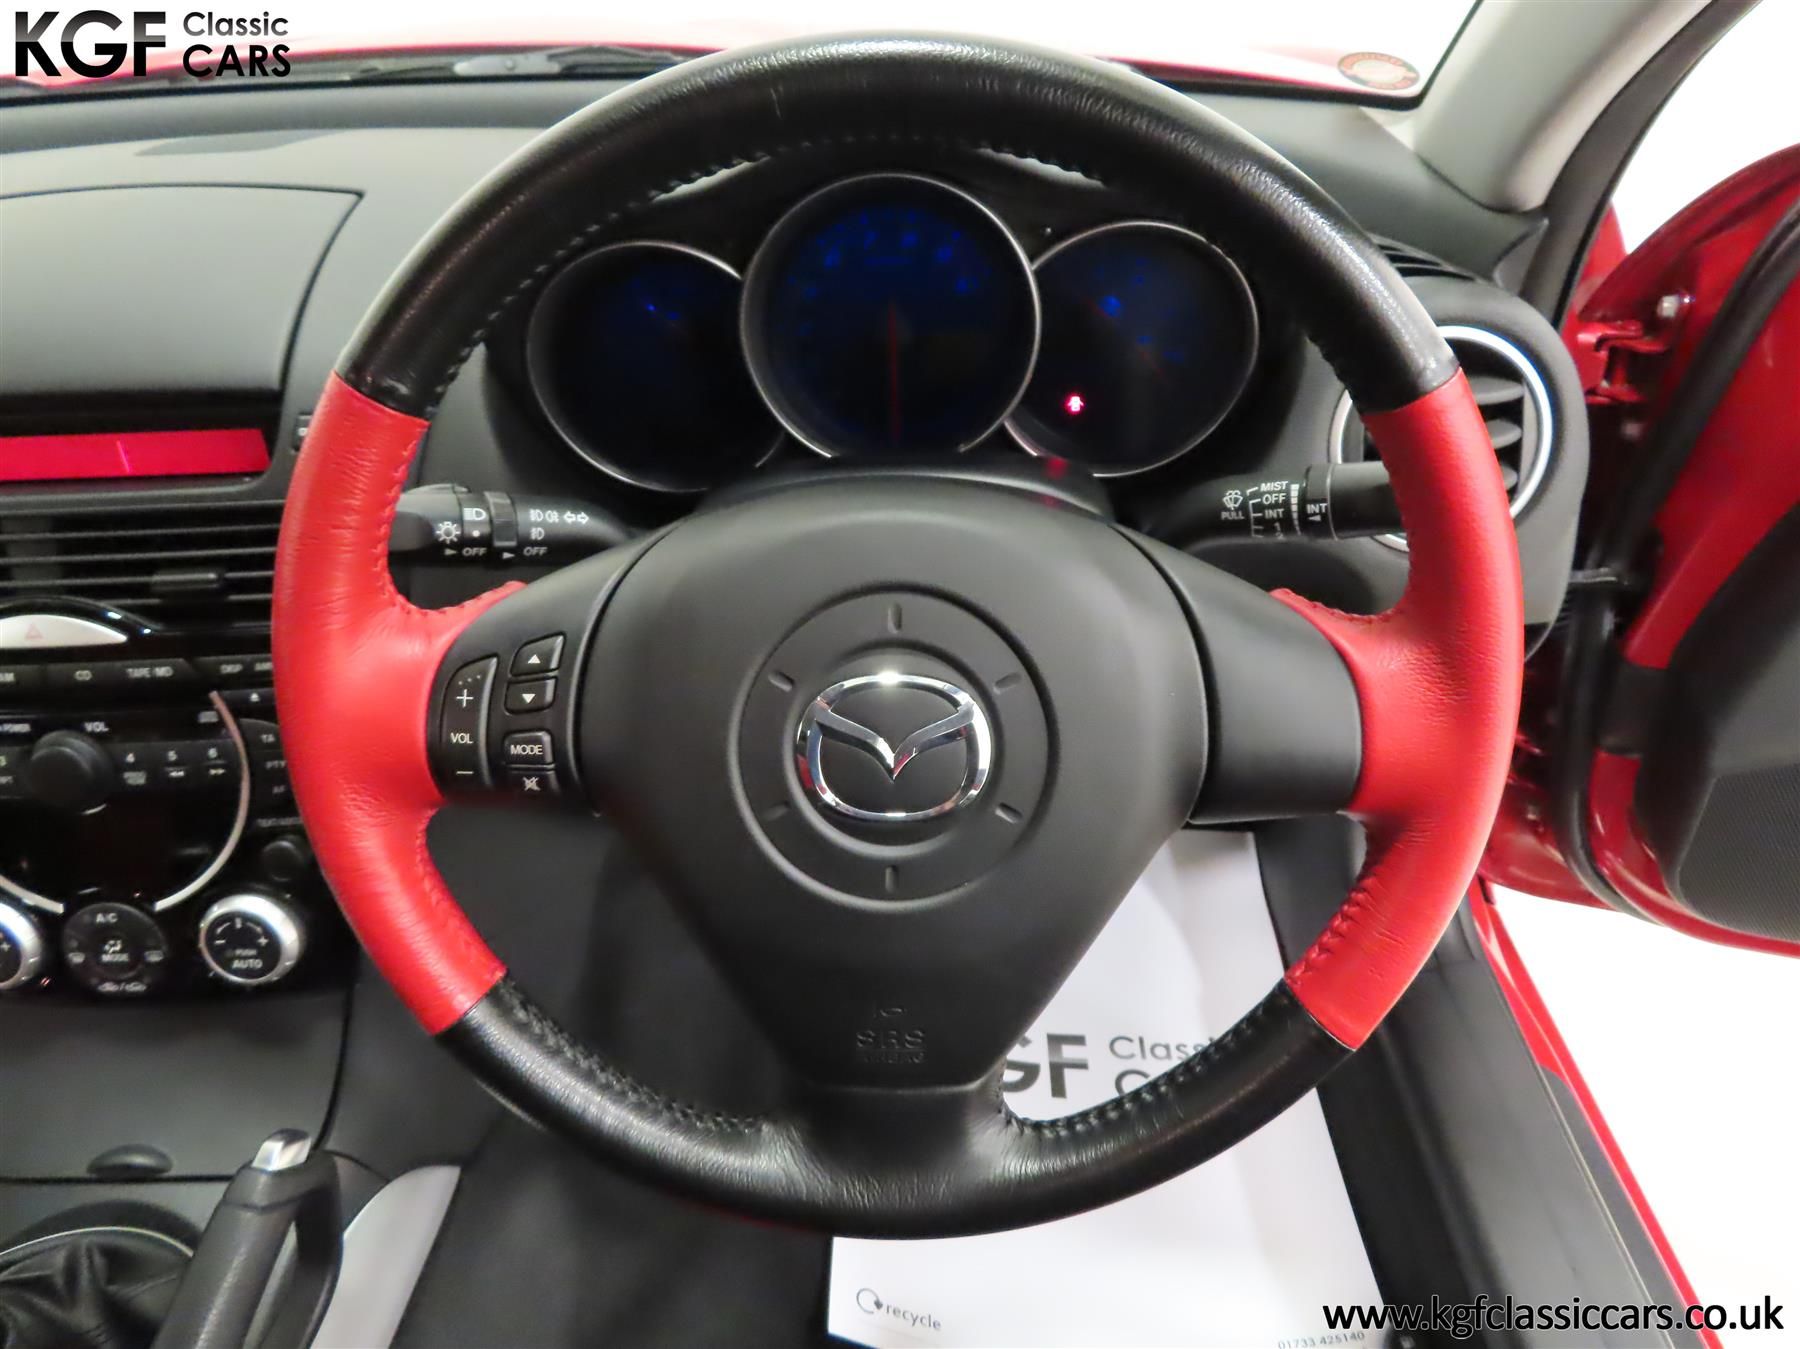 A Mazda RX-8 (230) with Full Main Dealer History and Just 8,510 Miles